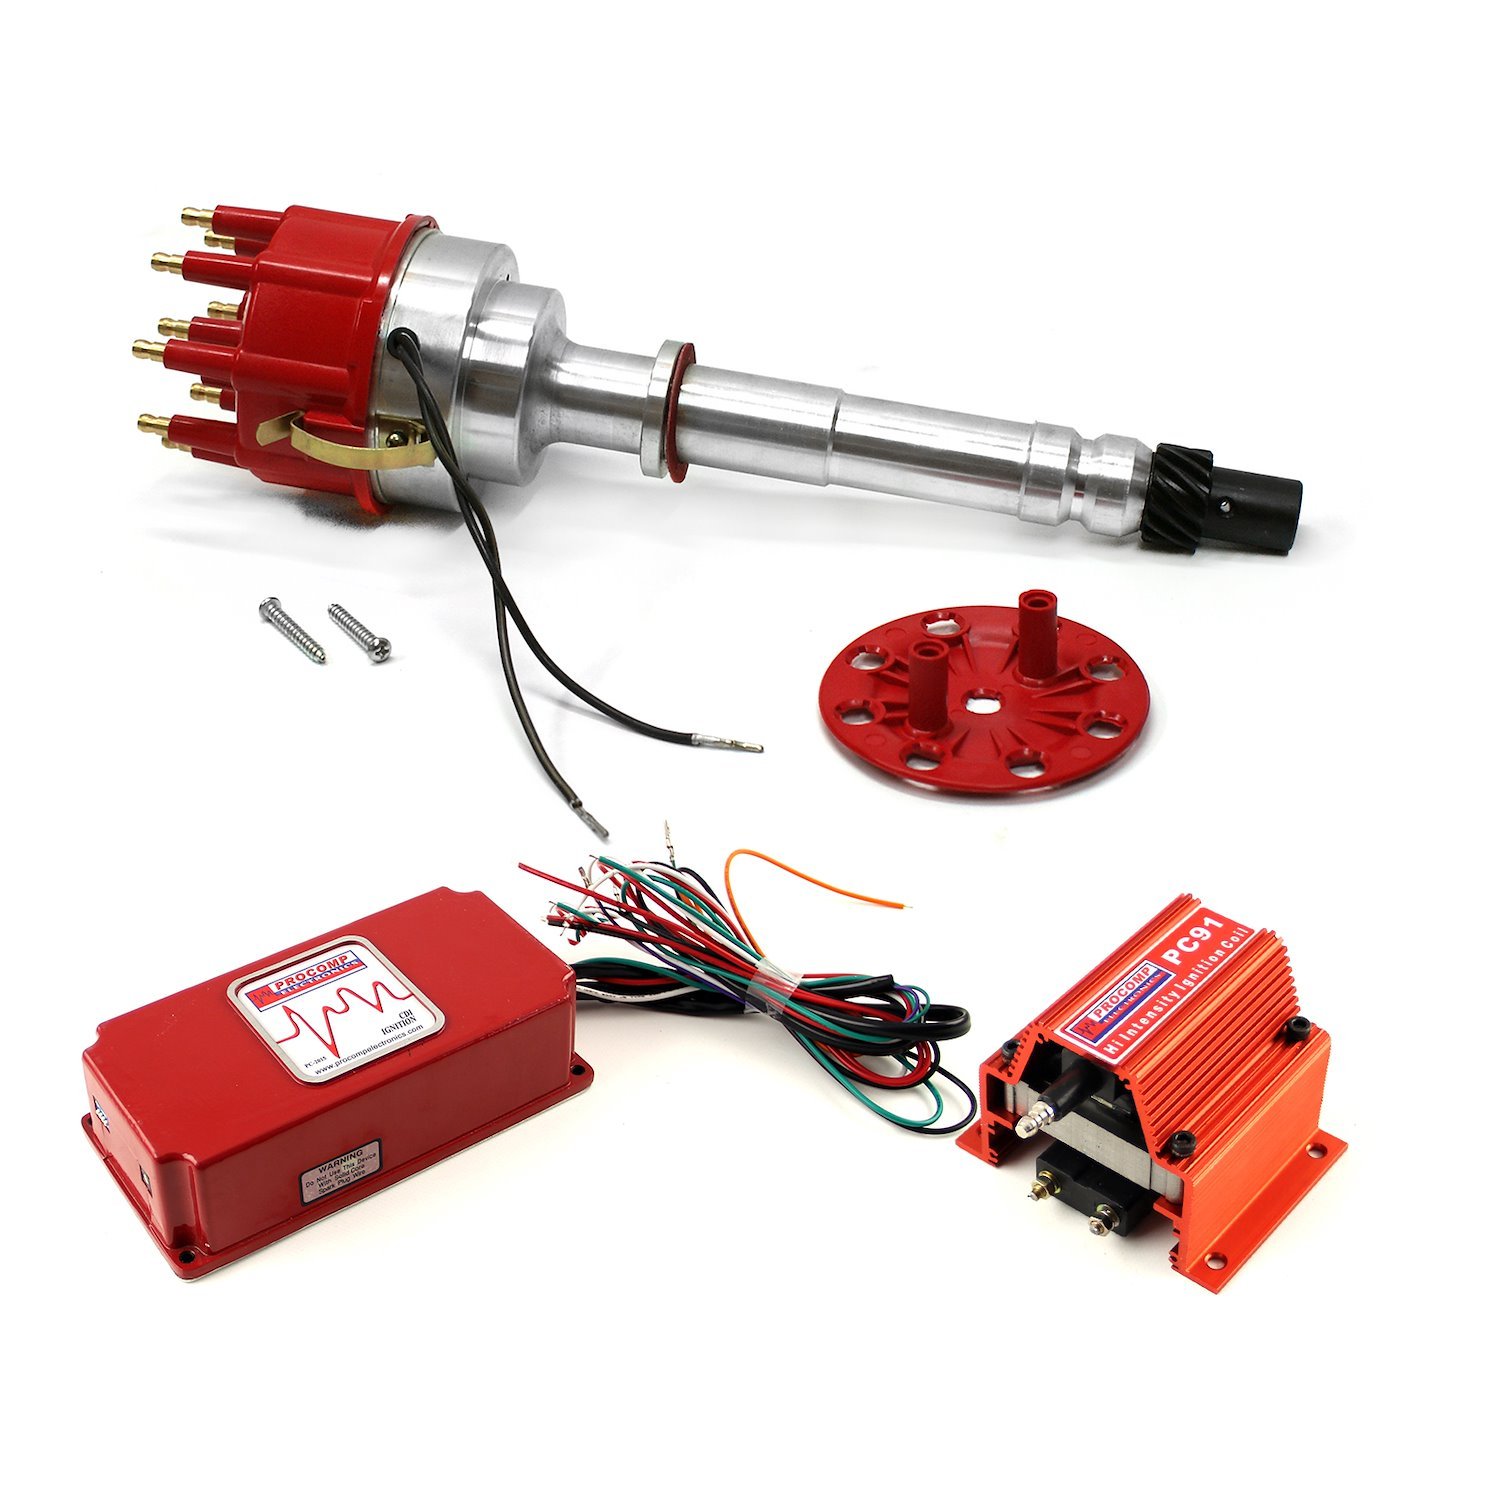 Ignition System Combo Kit Small Block Chevy 350/Big Block Chevy 454 [Pro-Billet Distributor 6AL CDI Ignition & Coil]